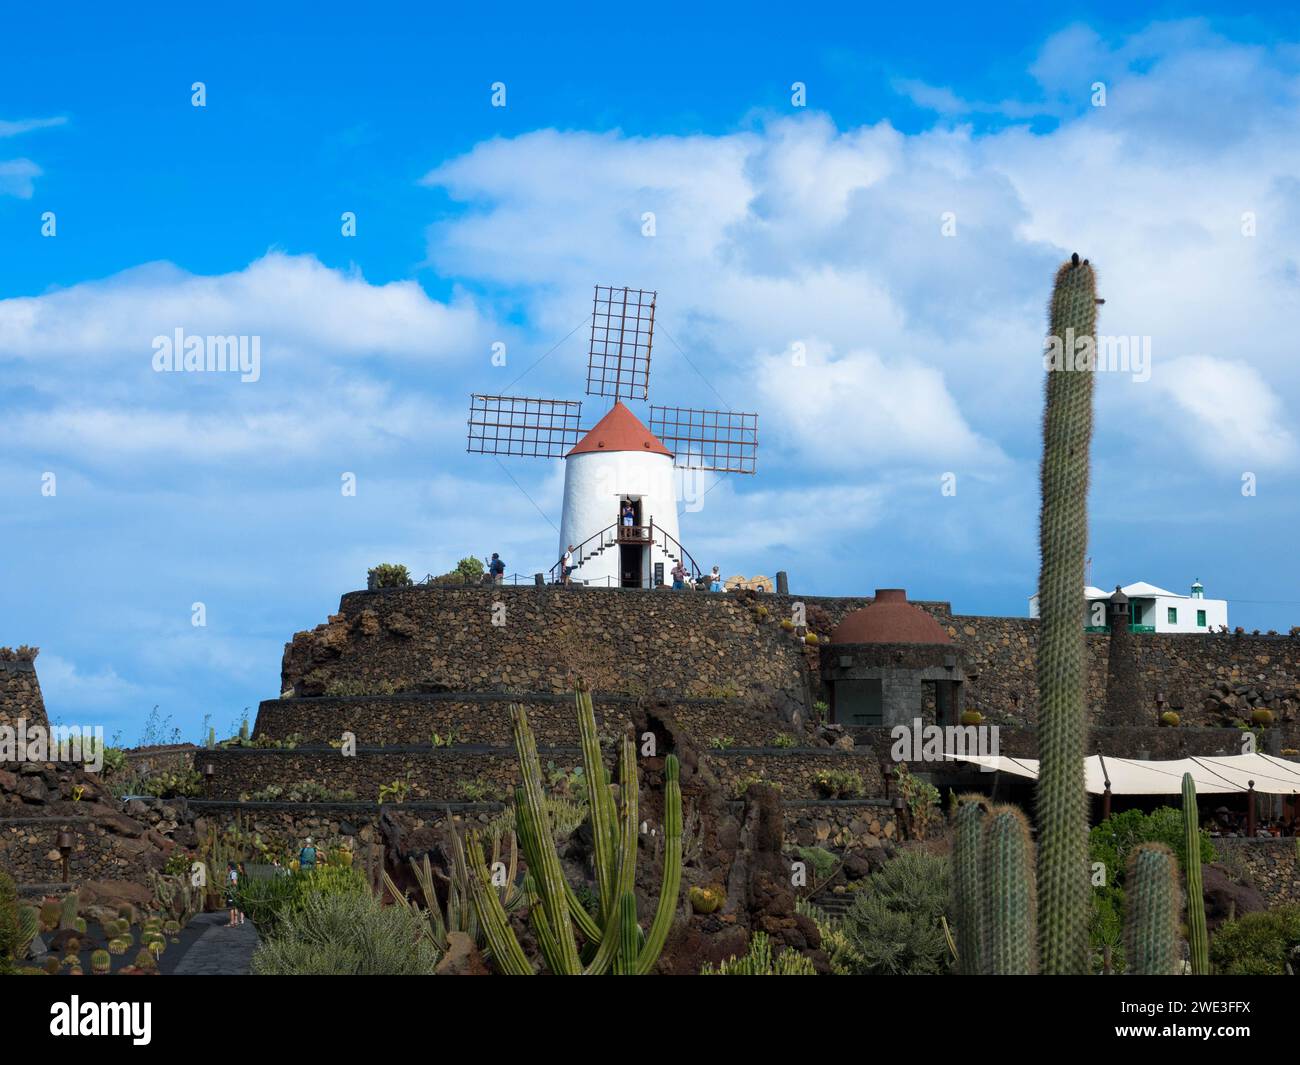 View of windmill at Jardin de Cactus, famous botanical cactus garden  near Guatiza in Lanzarote island. Popular sightseeing in Canary Islands. Stock Photo